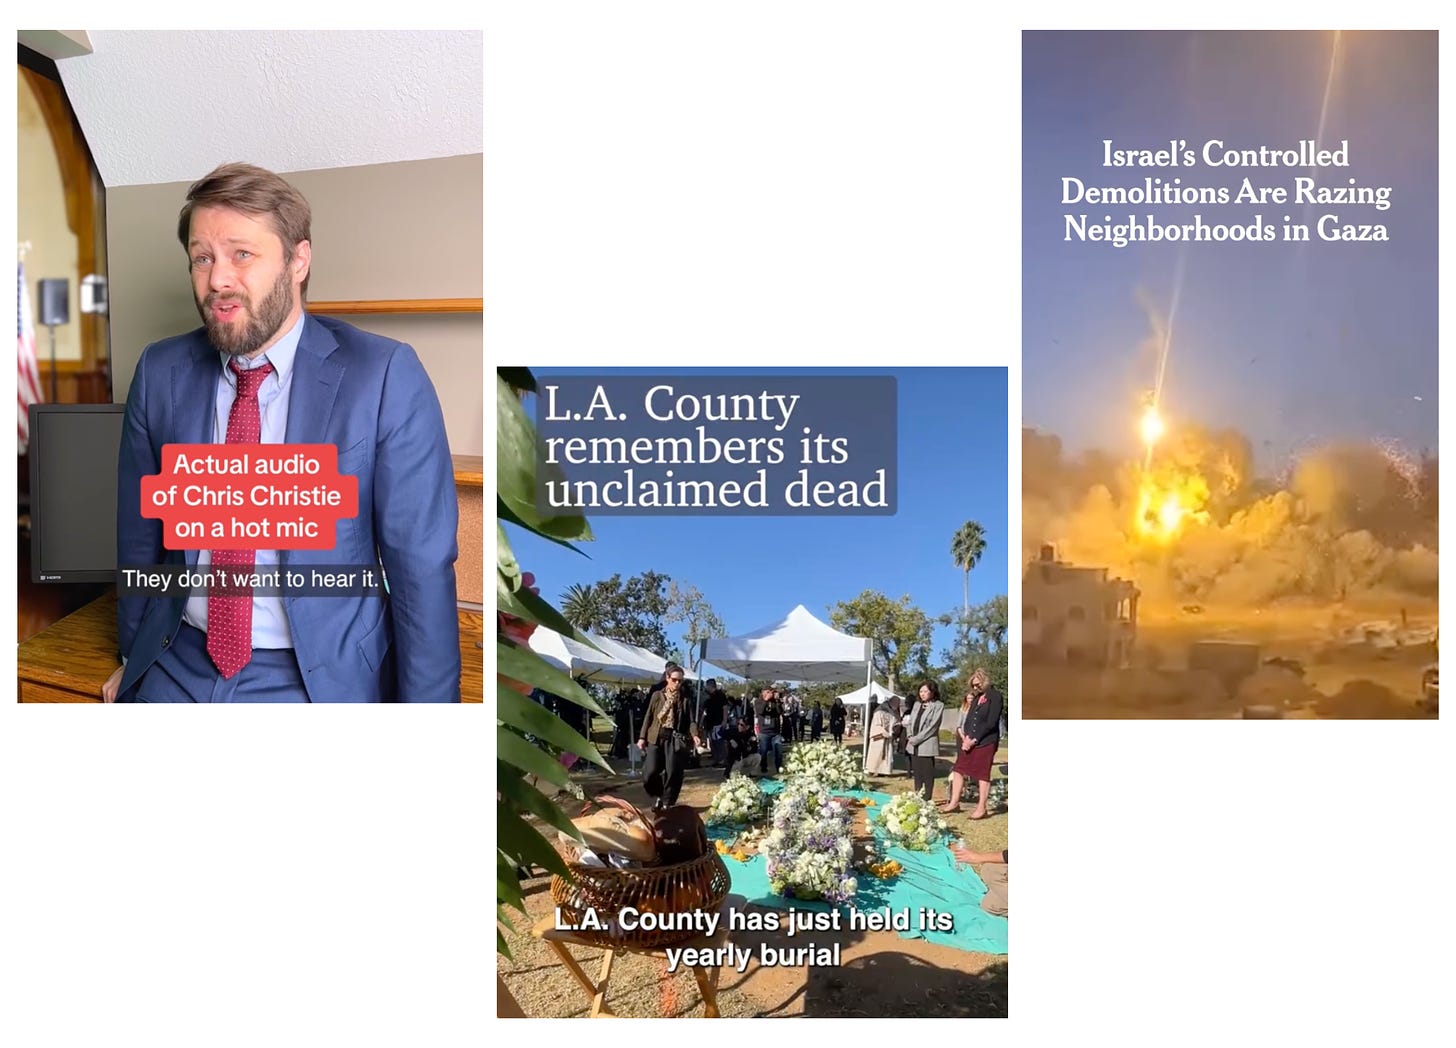 Three screenshots from news orgs on Reels. One is of Dave Jorgenson from Washington Post talking about the Chris Cristie hot mic, one is a screenshot of the LA county yearly buruial of the unclaimed dead, and finally a screenshot from NY Times of a Reel about controlled demolitions.